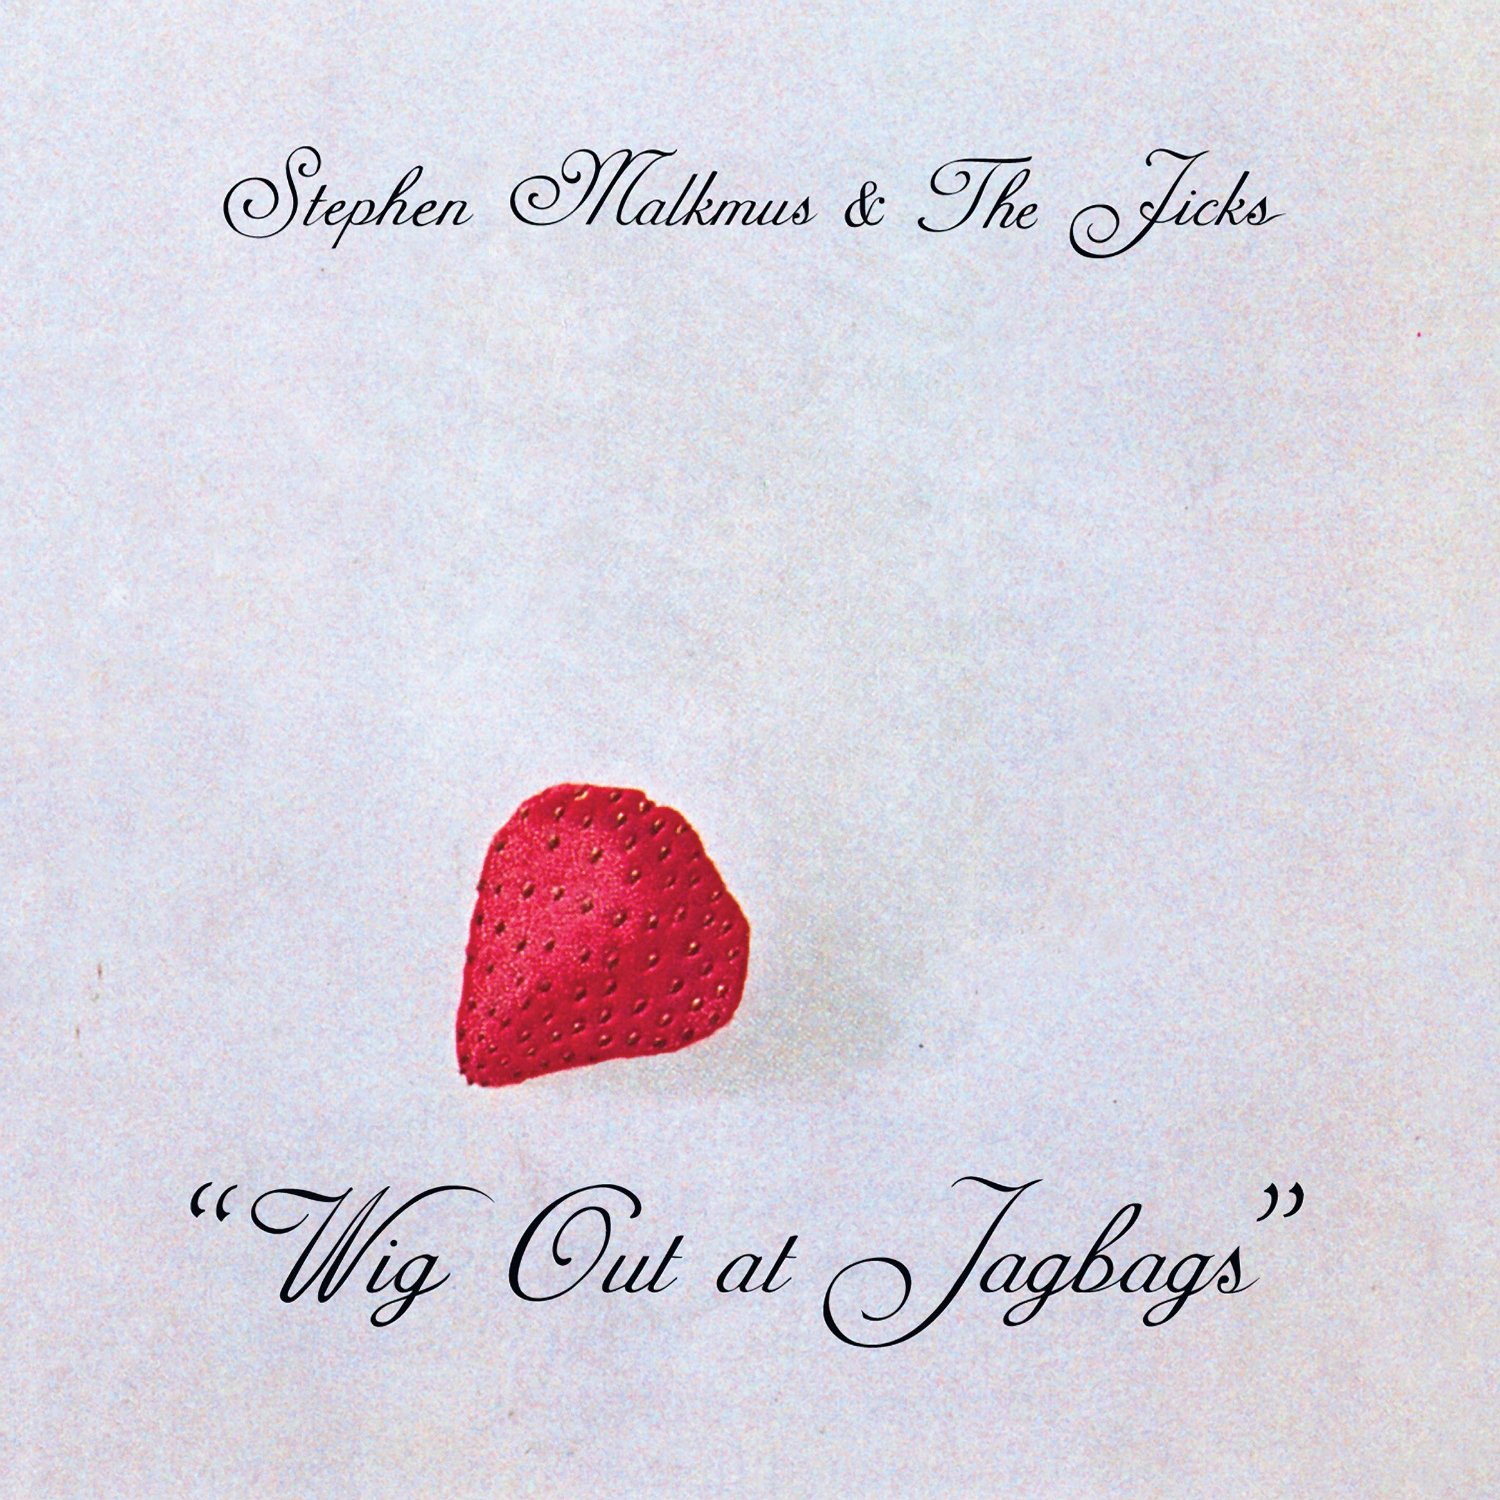 Stephen Malkmus And The Jicks' album, Wig Out At Jagbags, is out now.